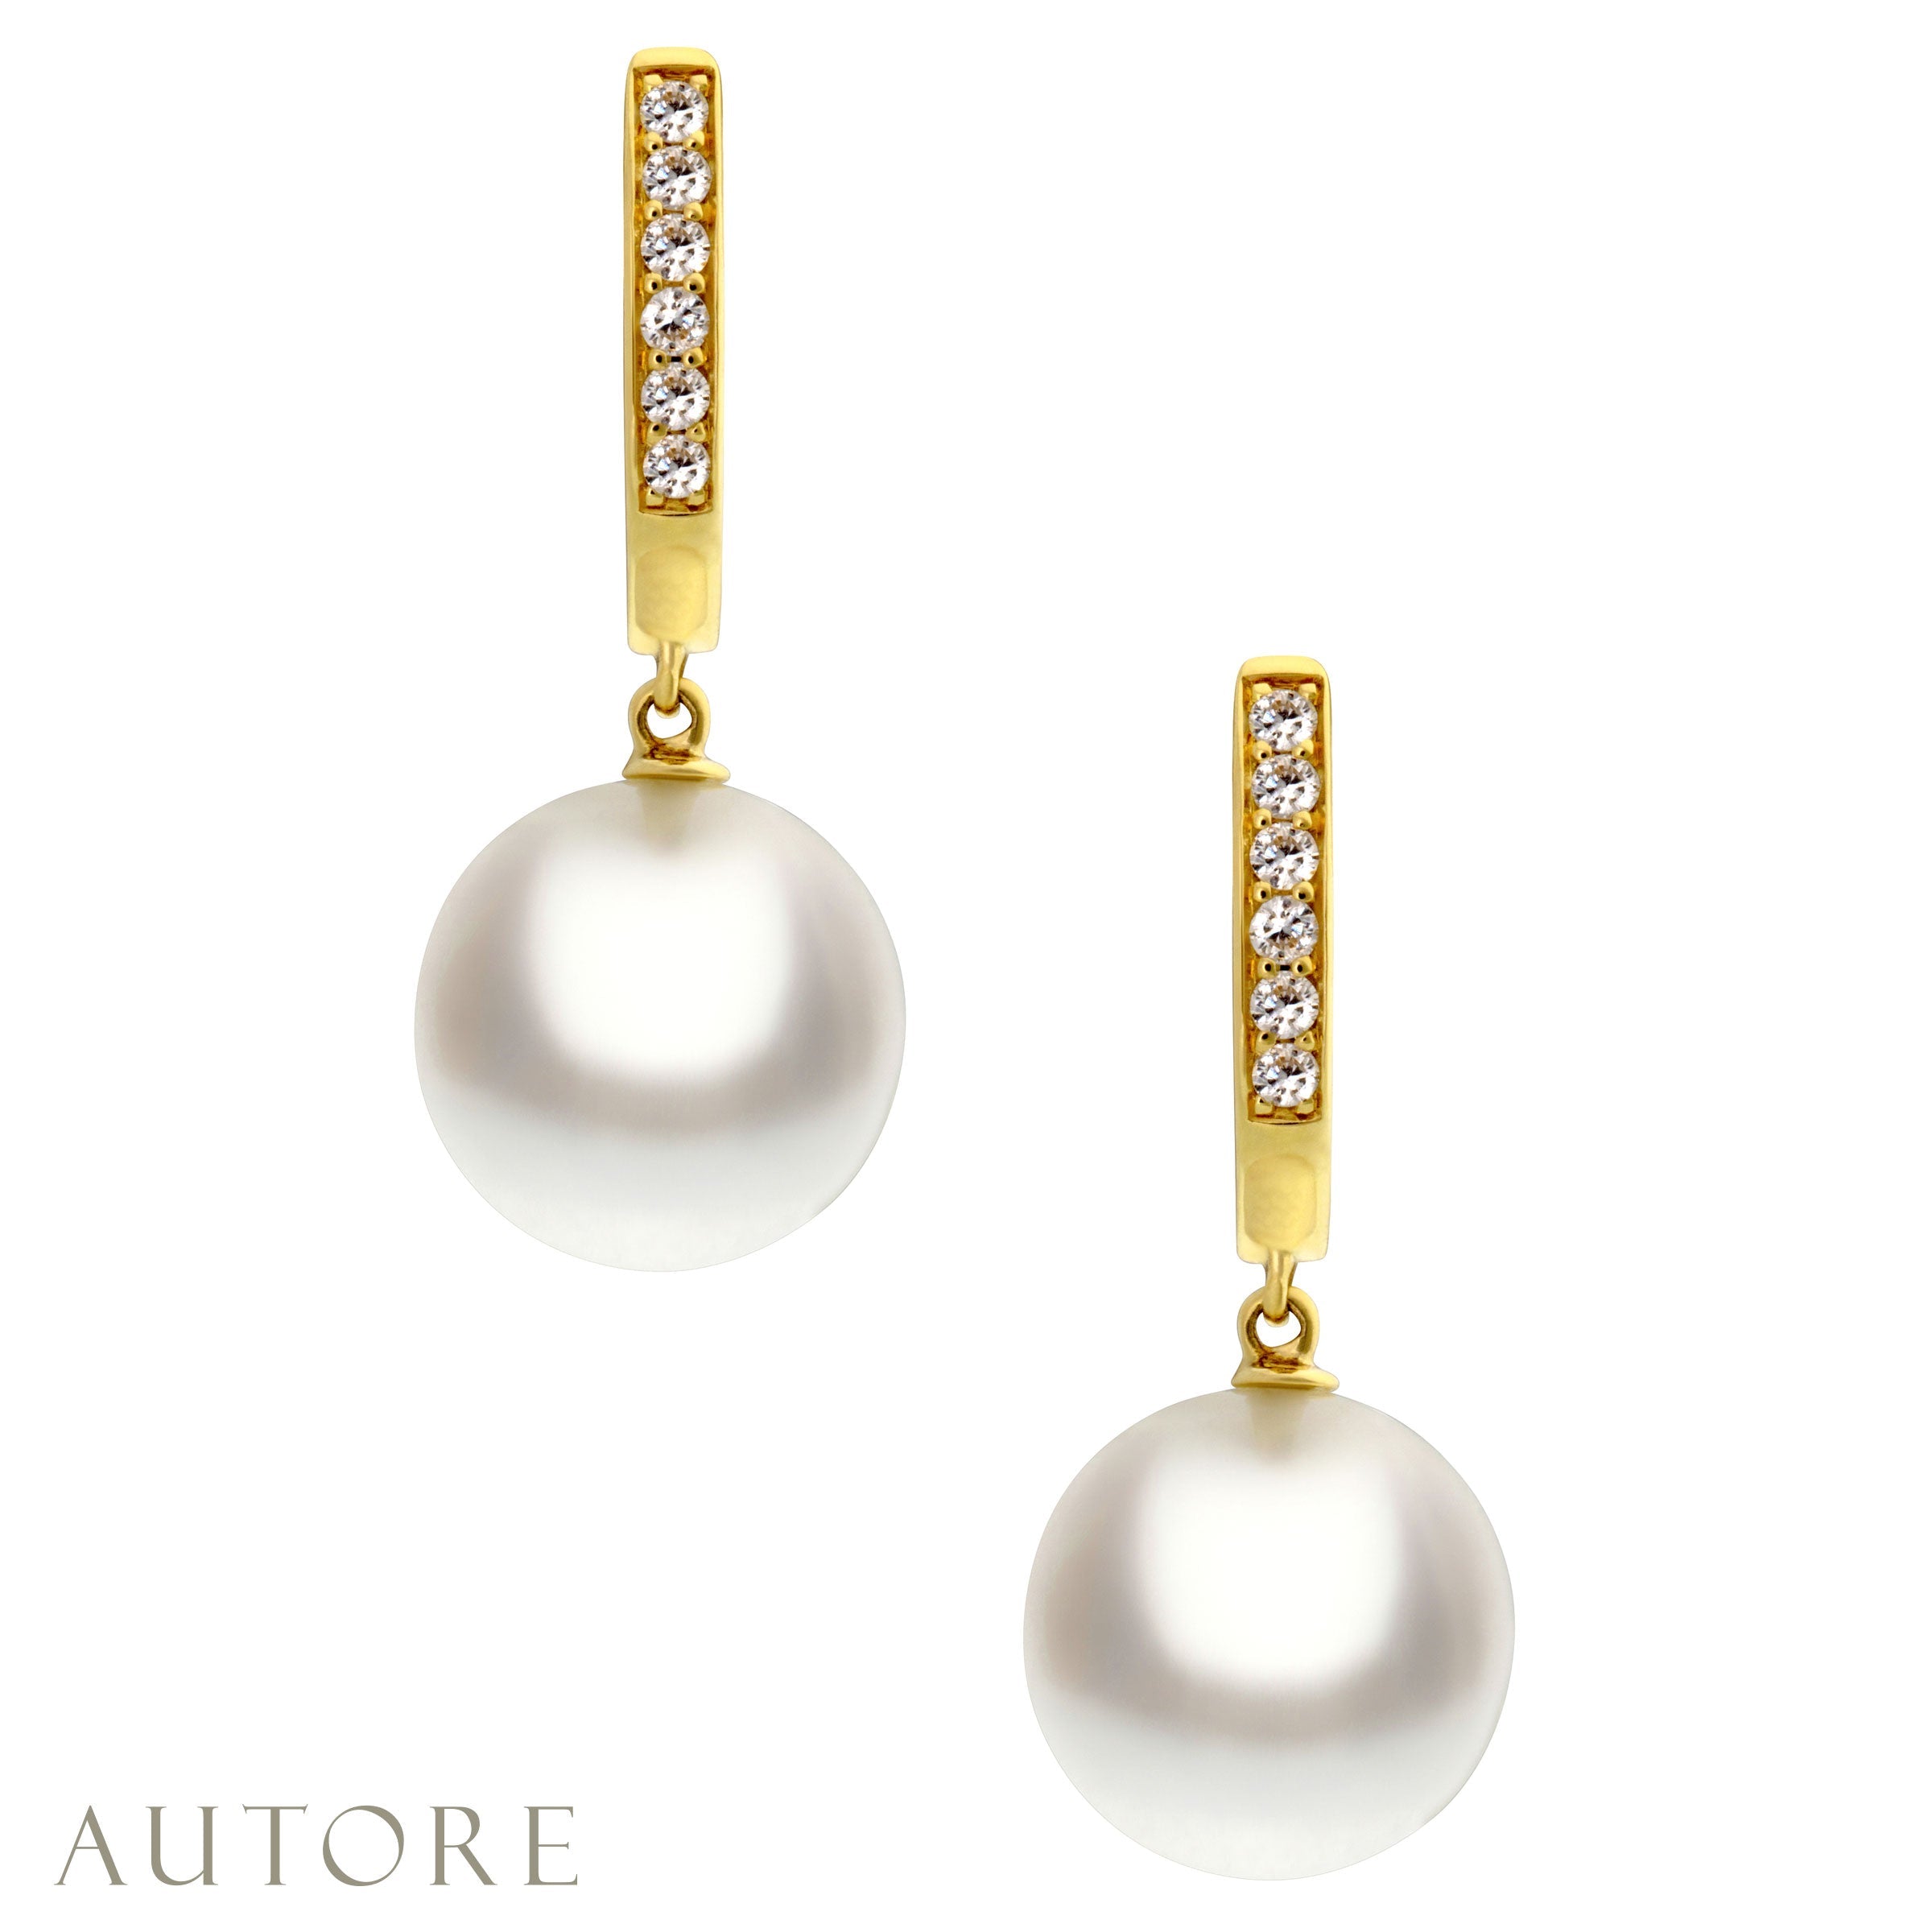 AUTORE 18ct gold 9mm South Sea pearl and diamond huggie earrings